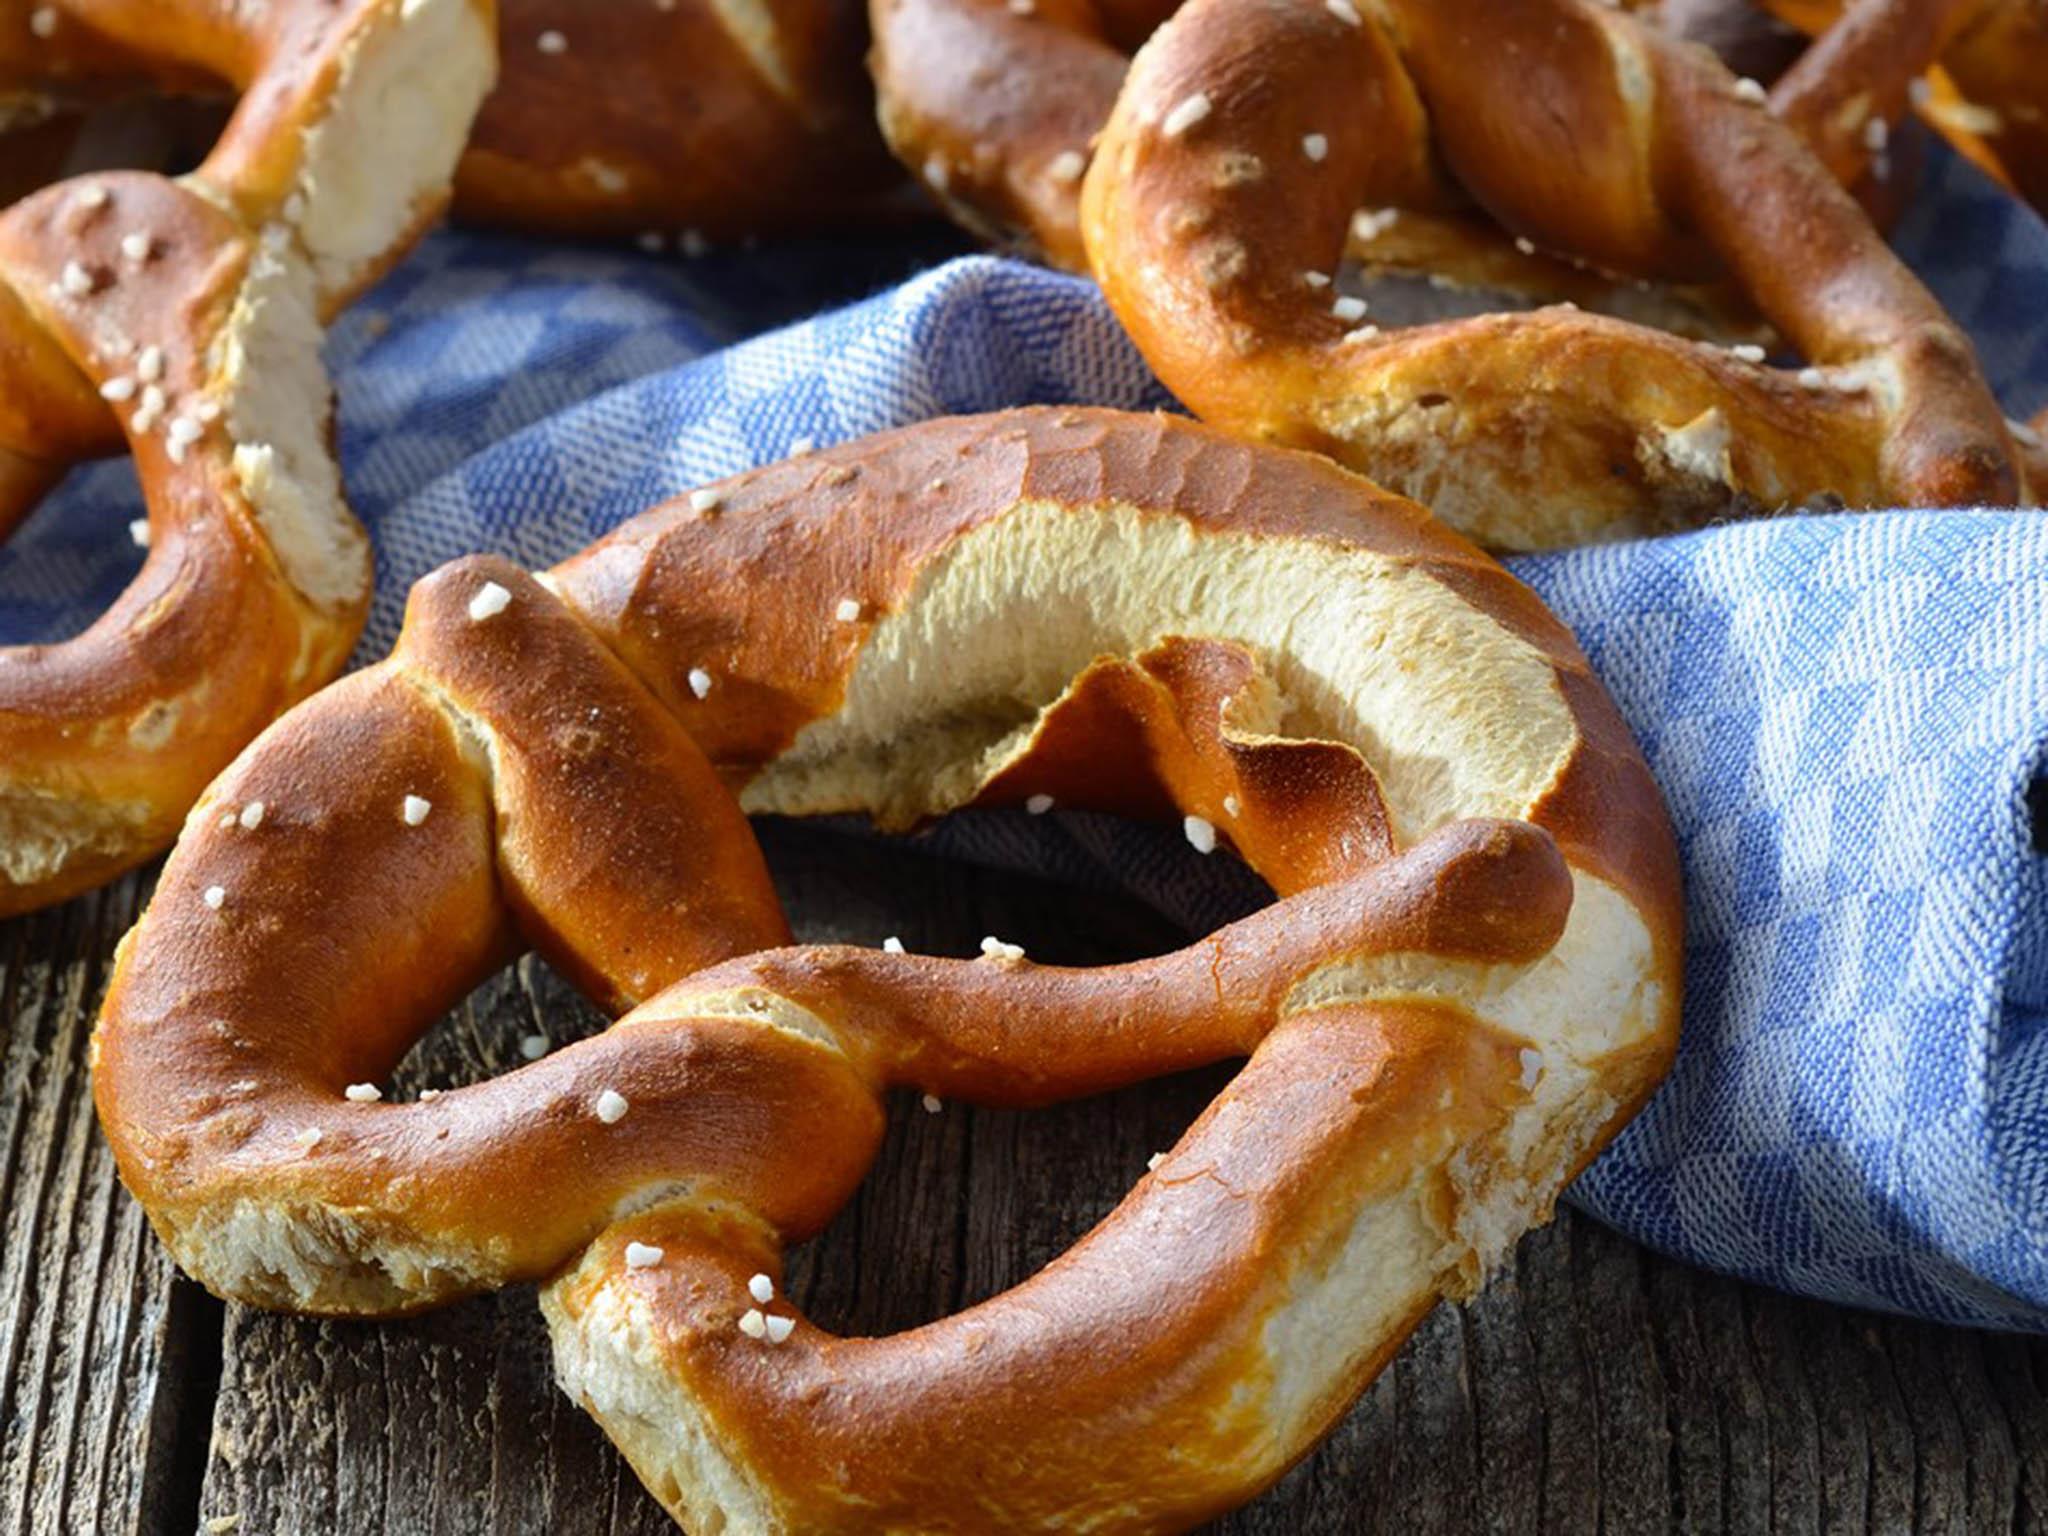 Pretzels don’t have to be savoury; you can sprinkle them with sugar instead of salt or spices such as cinnamon or nutmeg